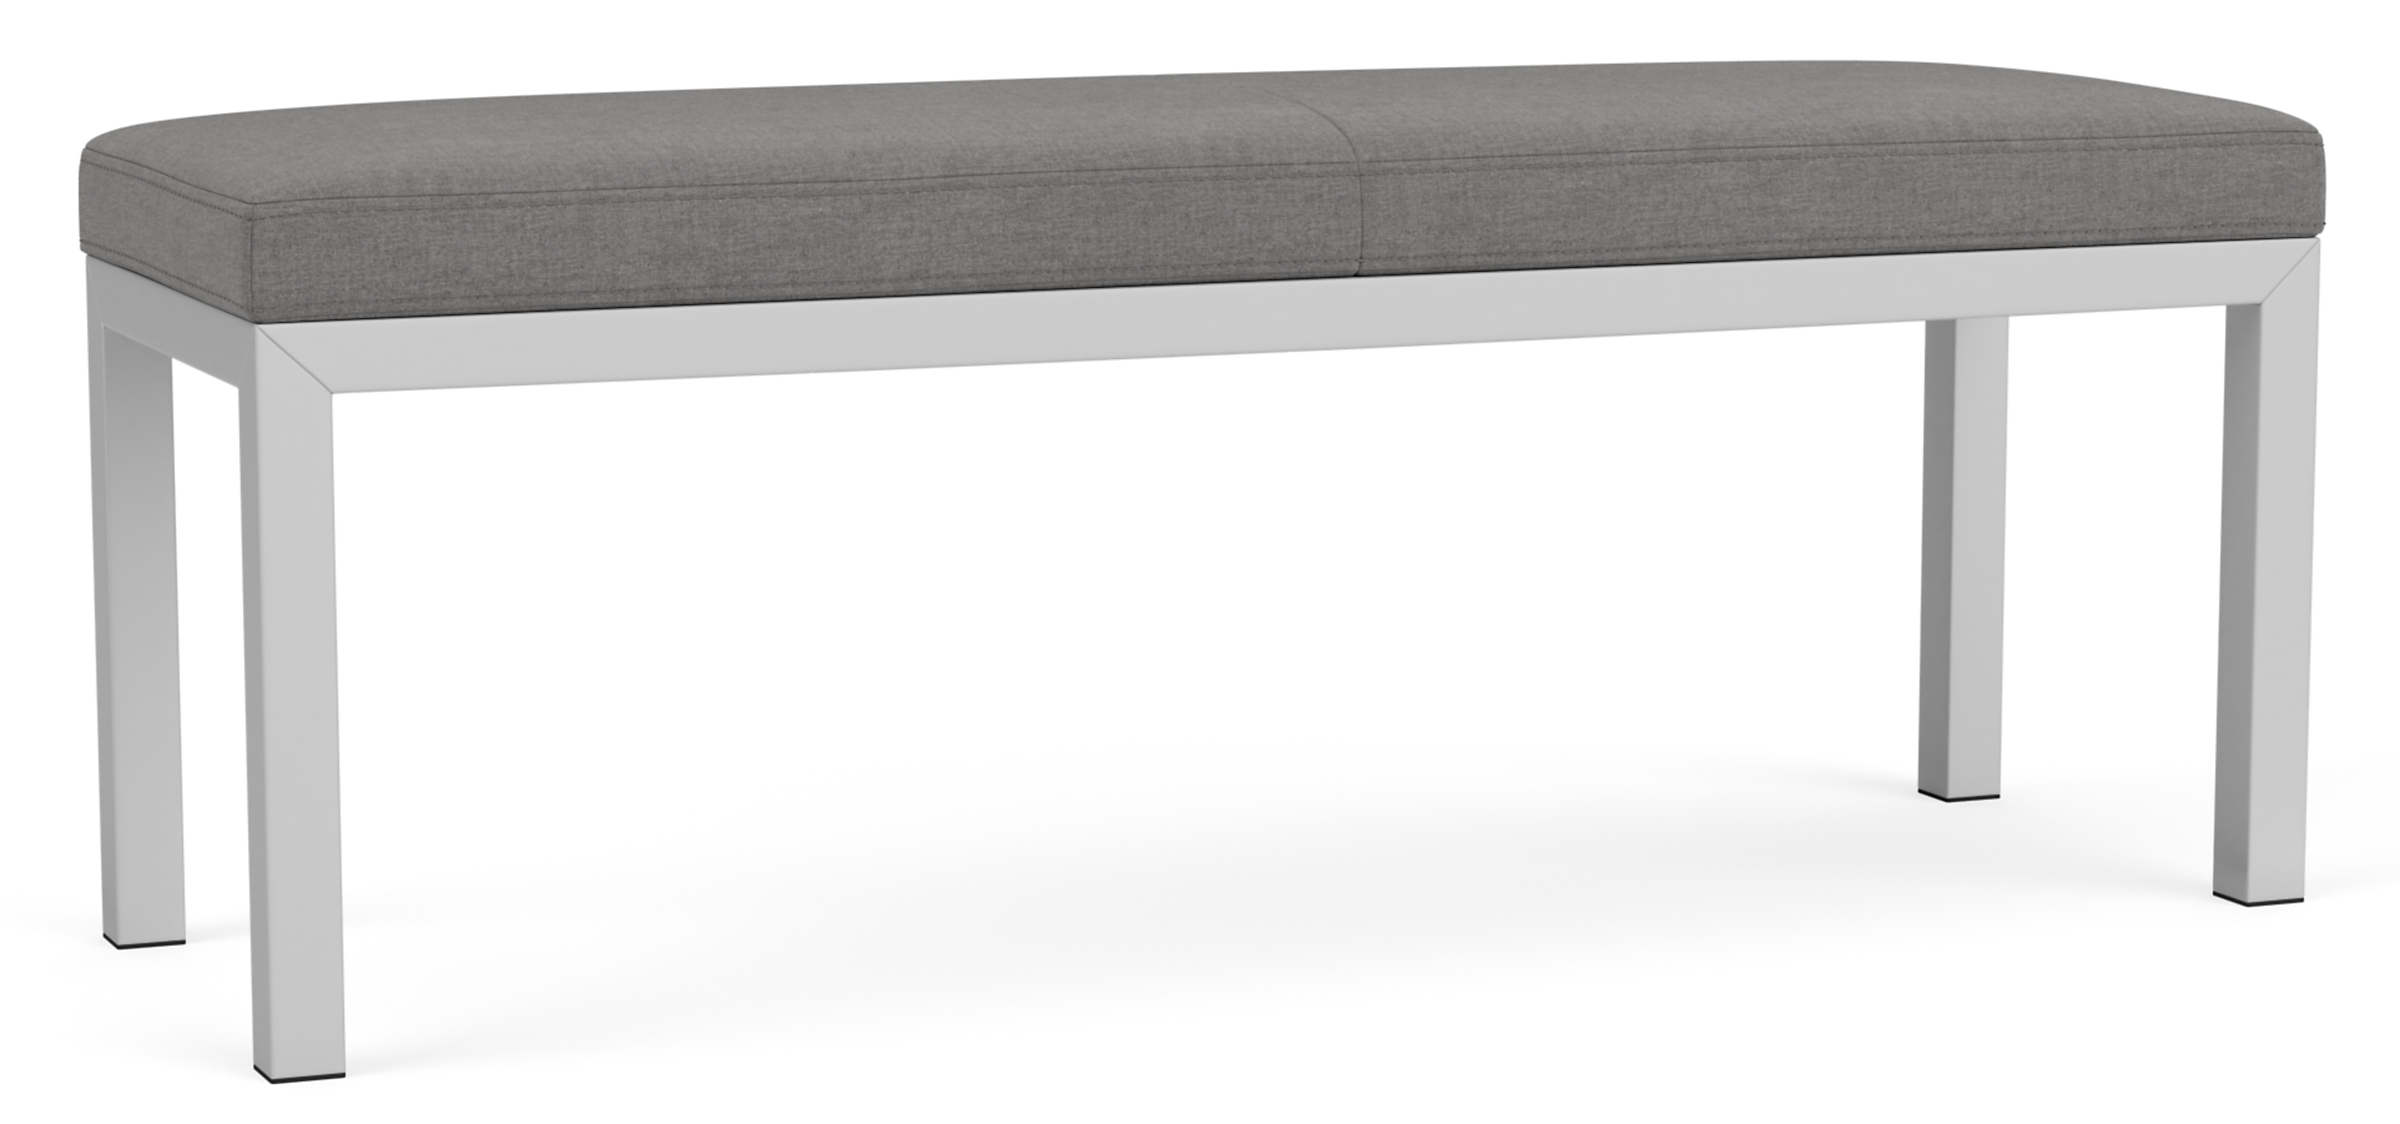 Parsons 46w 15d 18h Outdoor Bench in Sunbrella Canvas Slate w/Stainless Steel